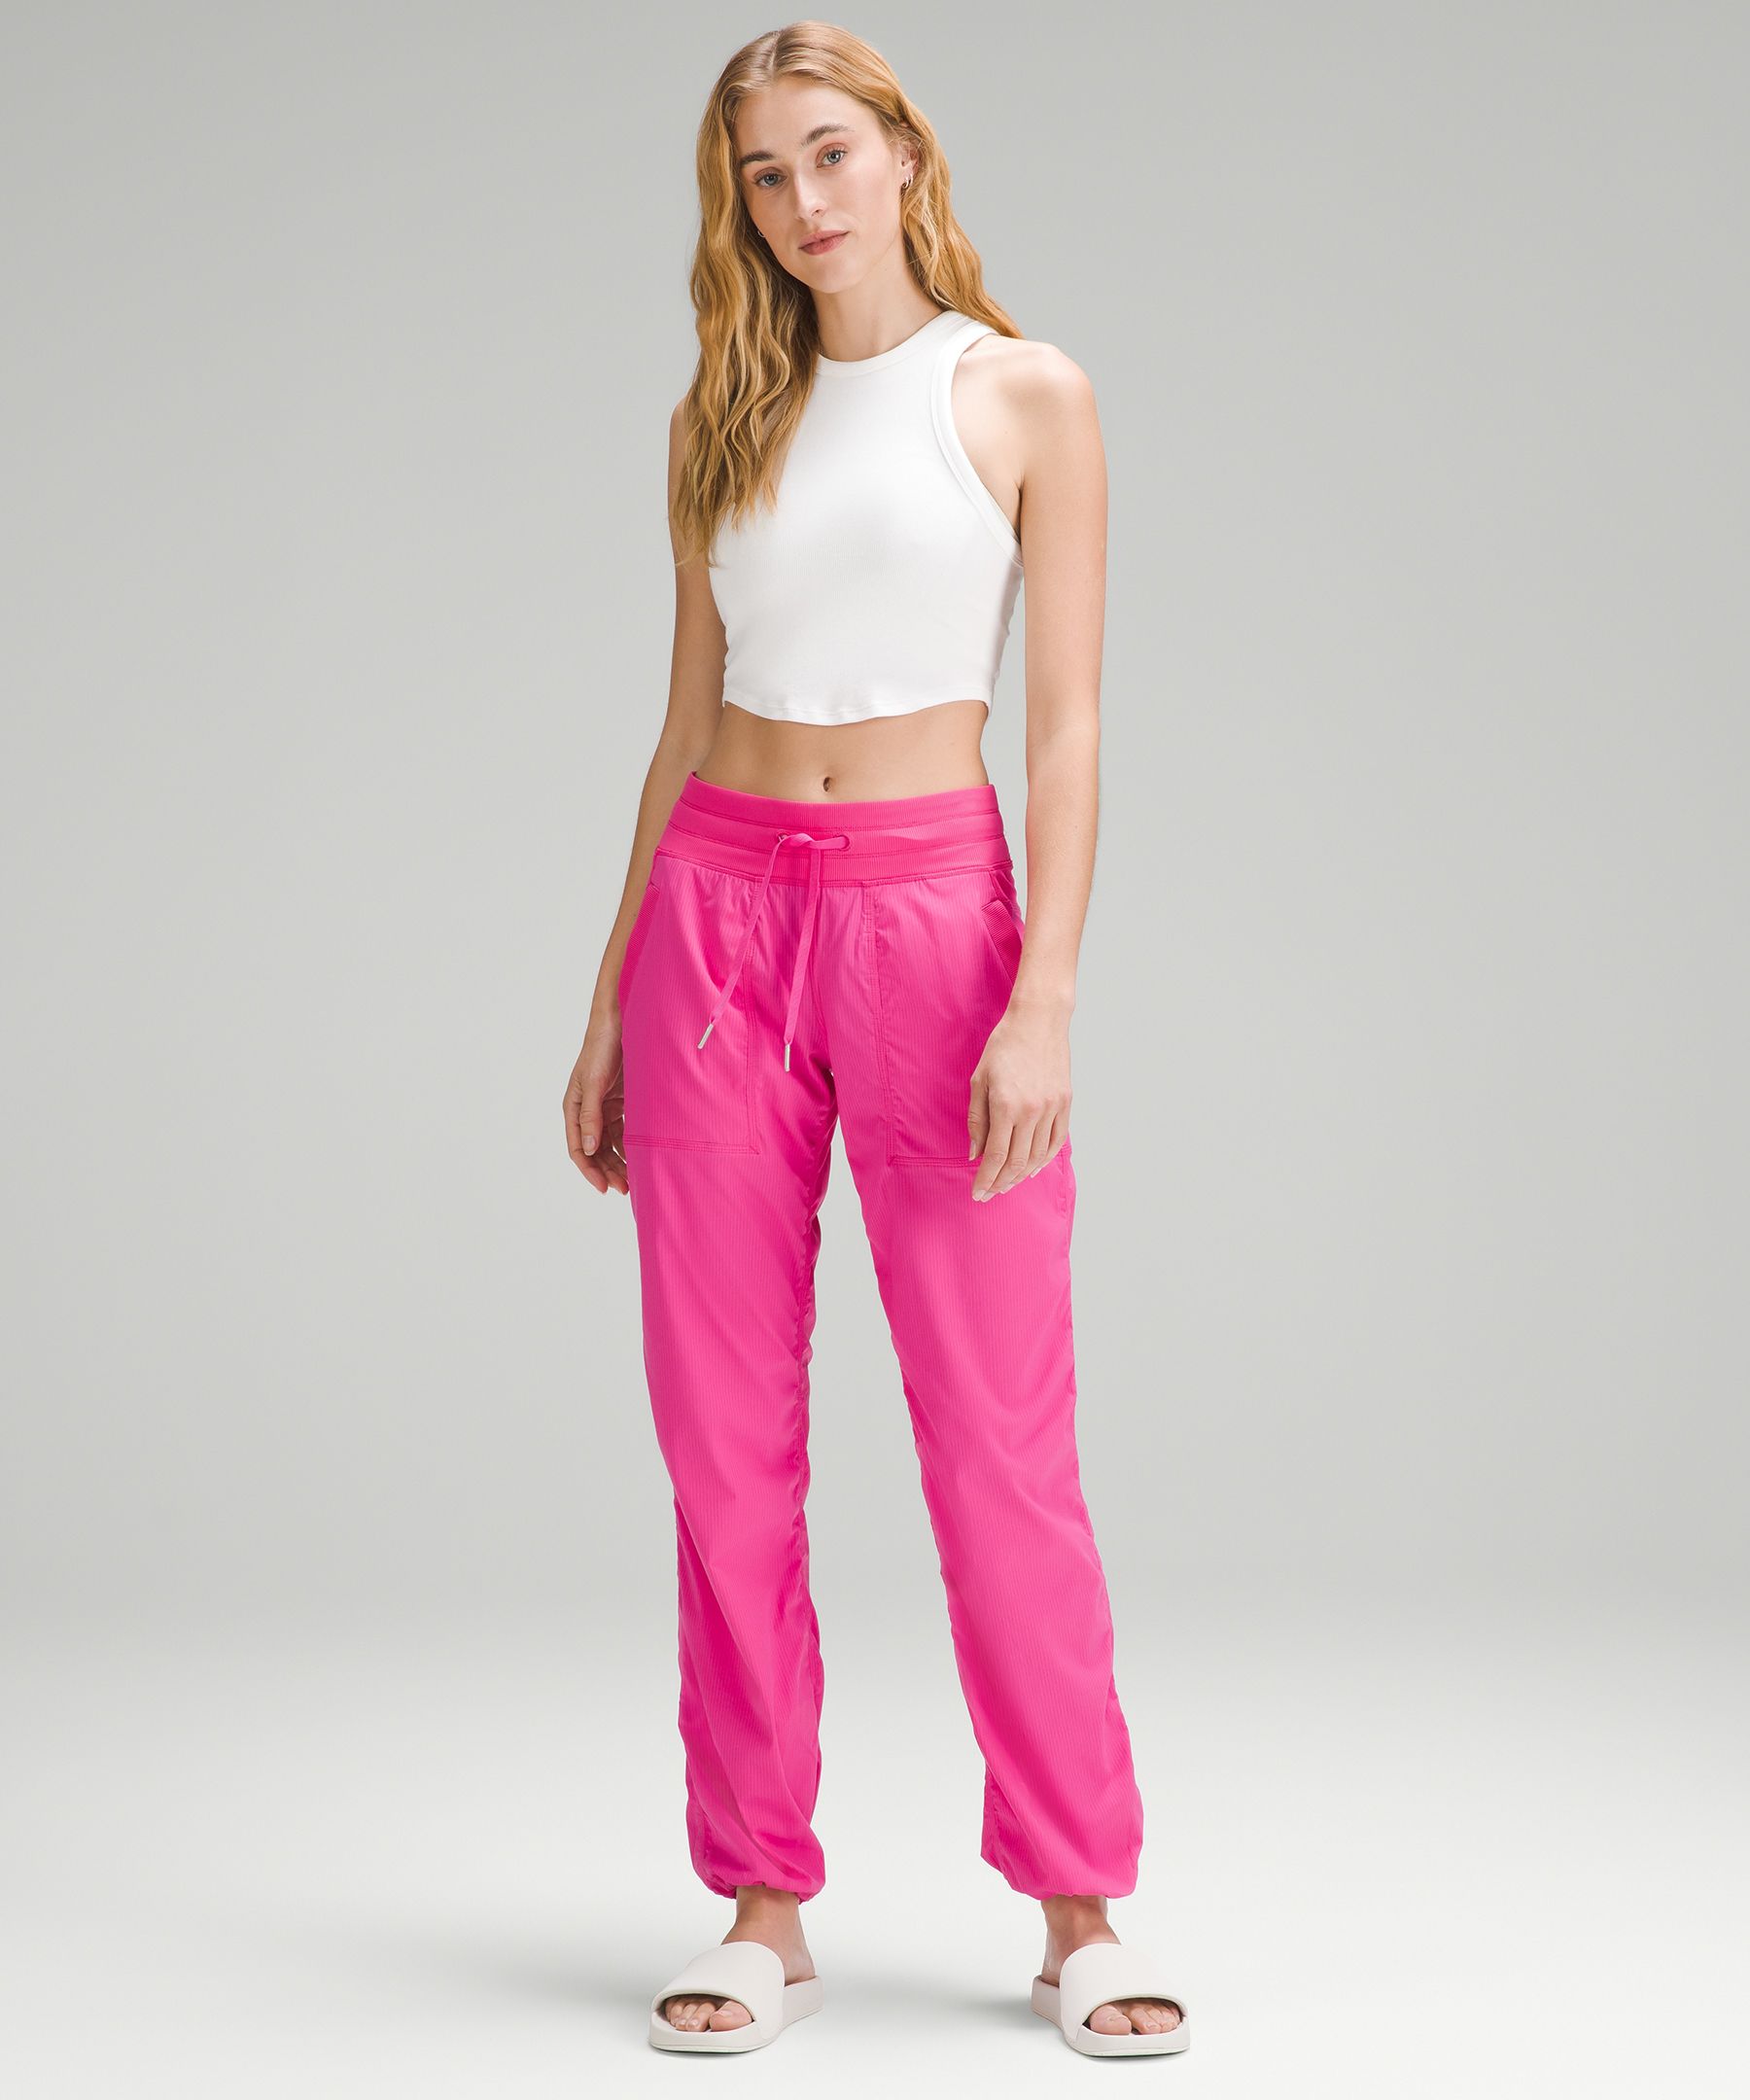 brand new with tags SONIC PINK DANCE STUDIO PANTS